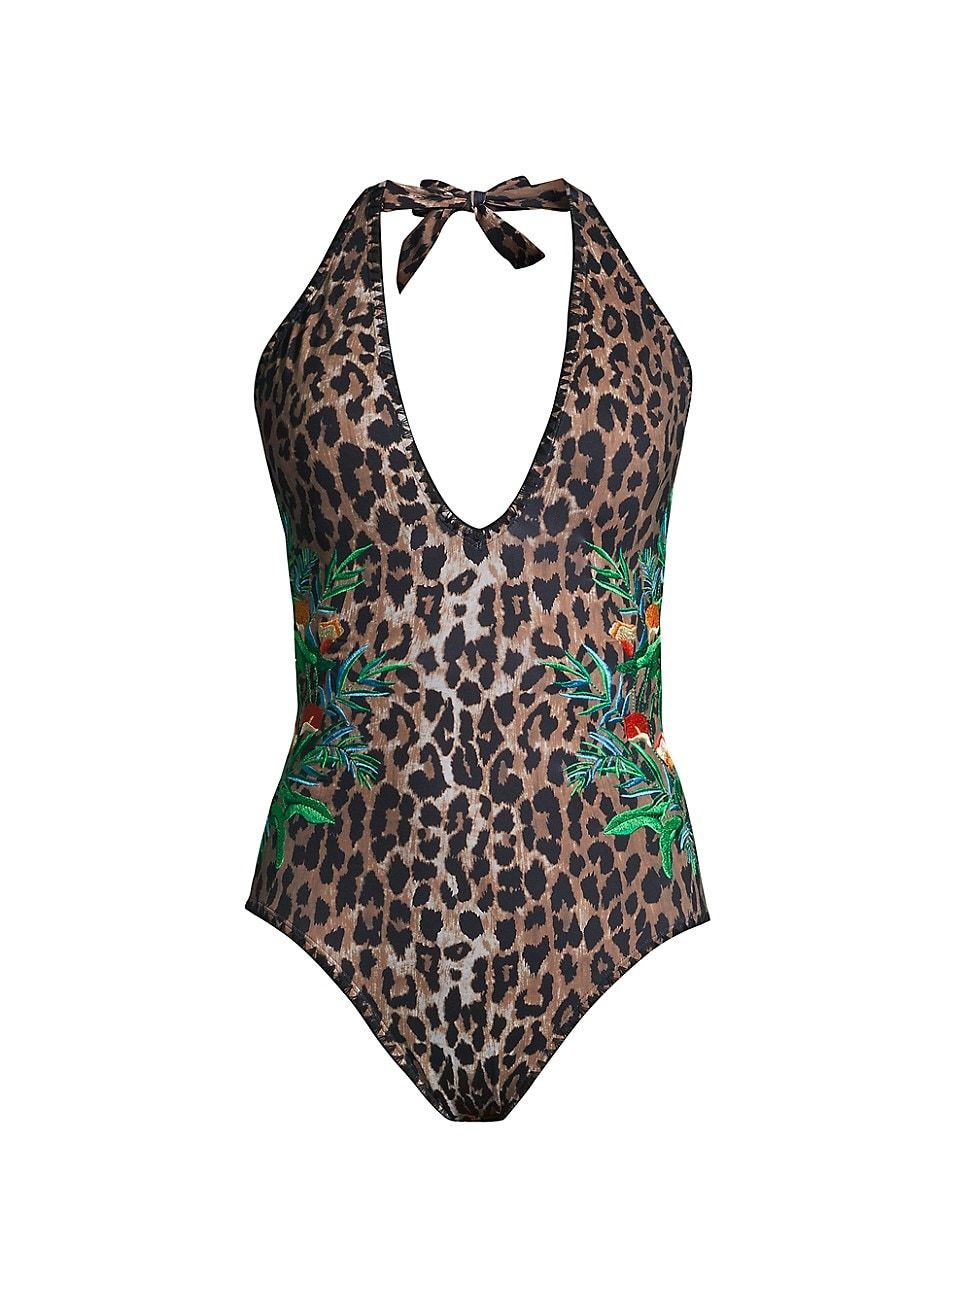 Johnny Was Vivianna Plunge Floral-Embroidered Leopard One-Piece Swimsuit | Saks Fifth Avenue